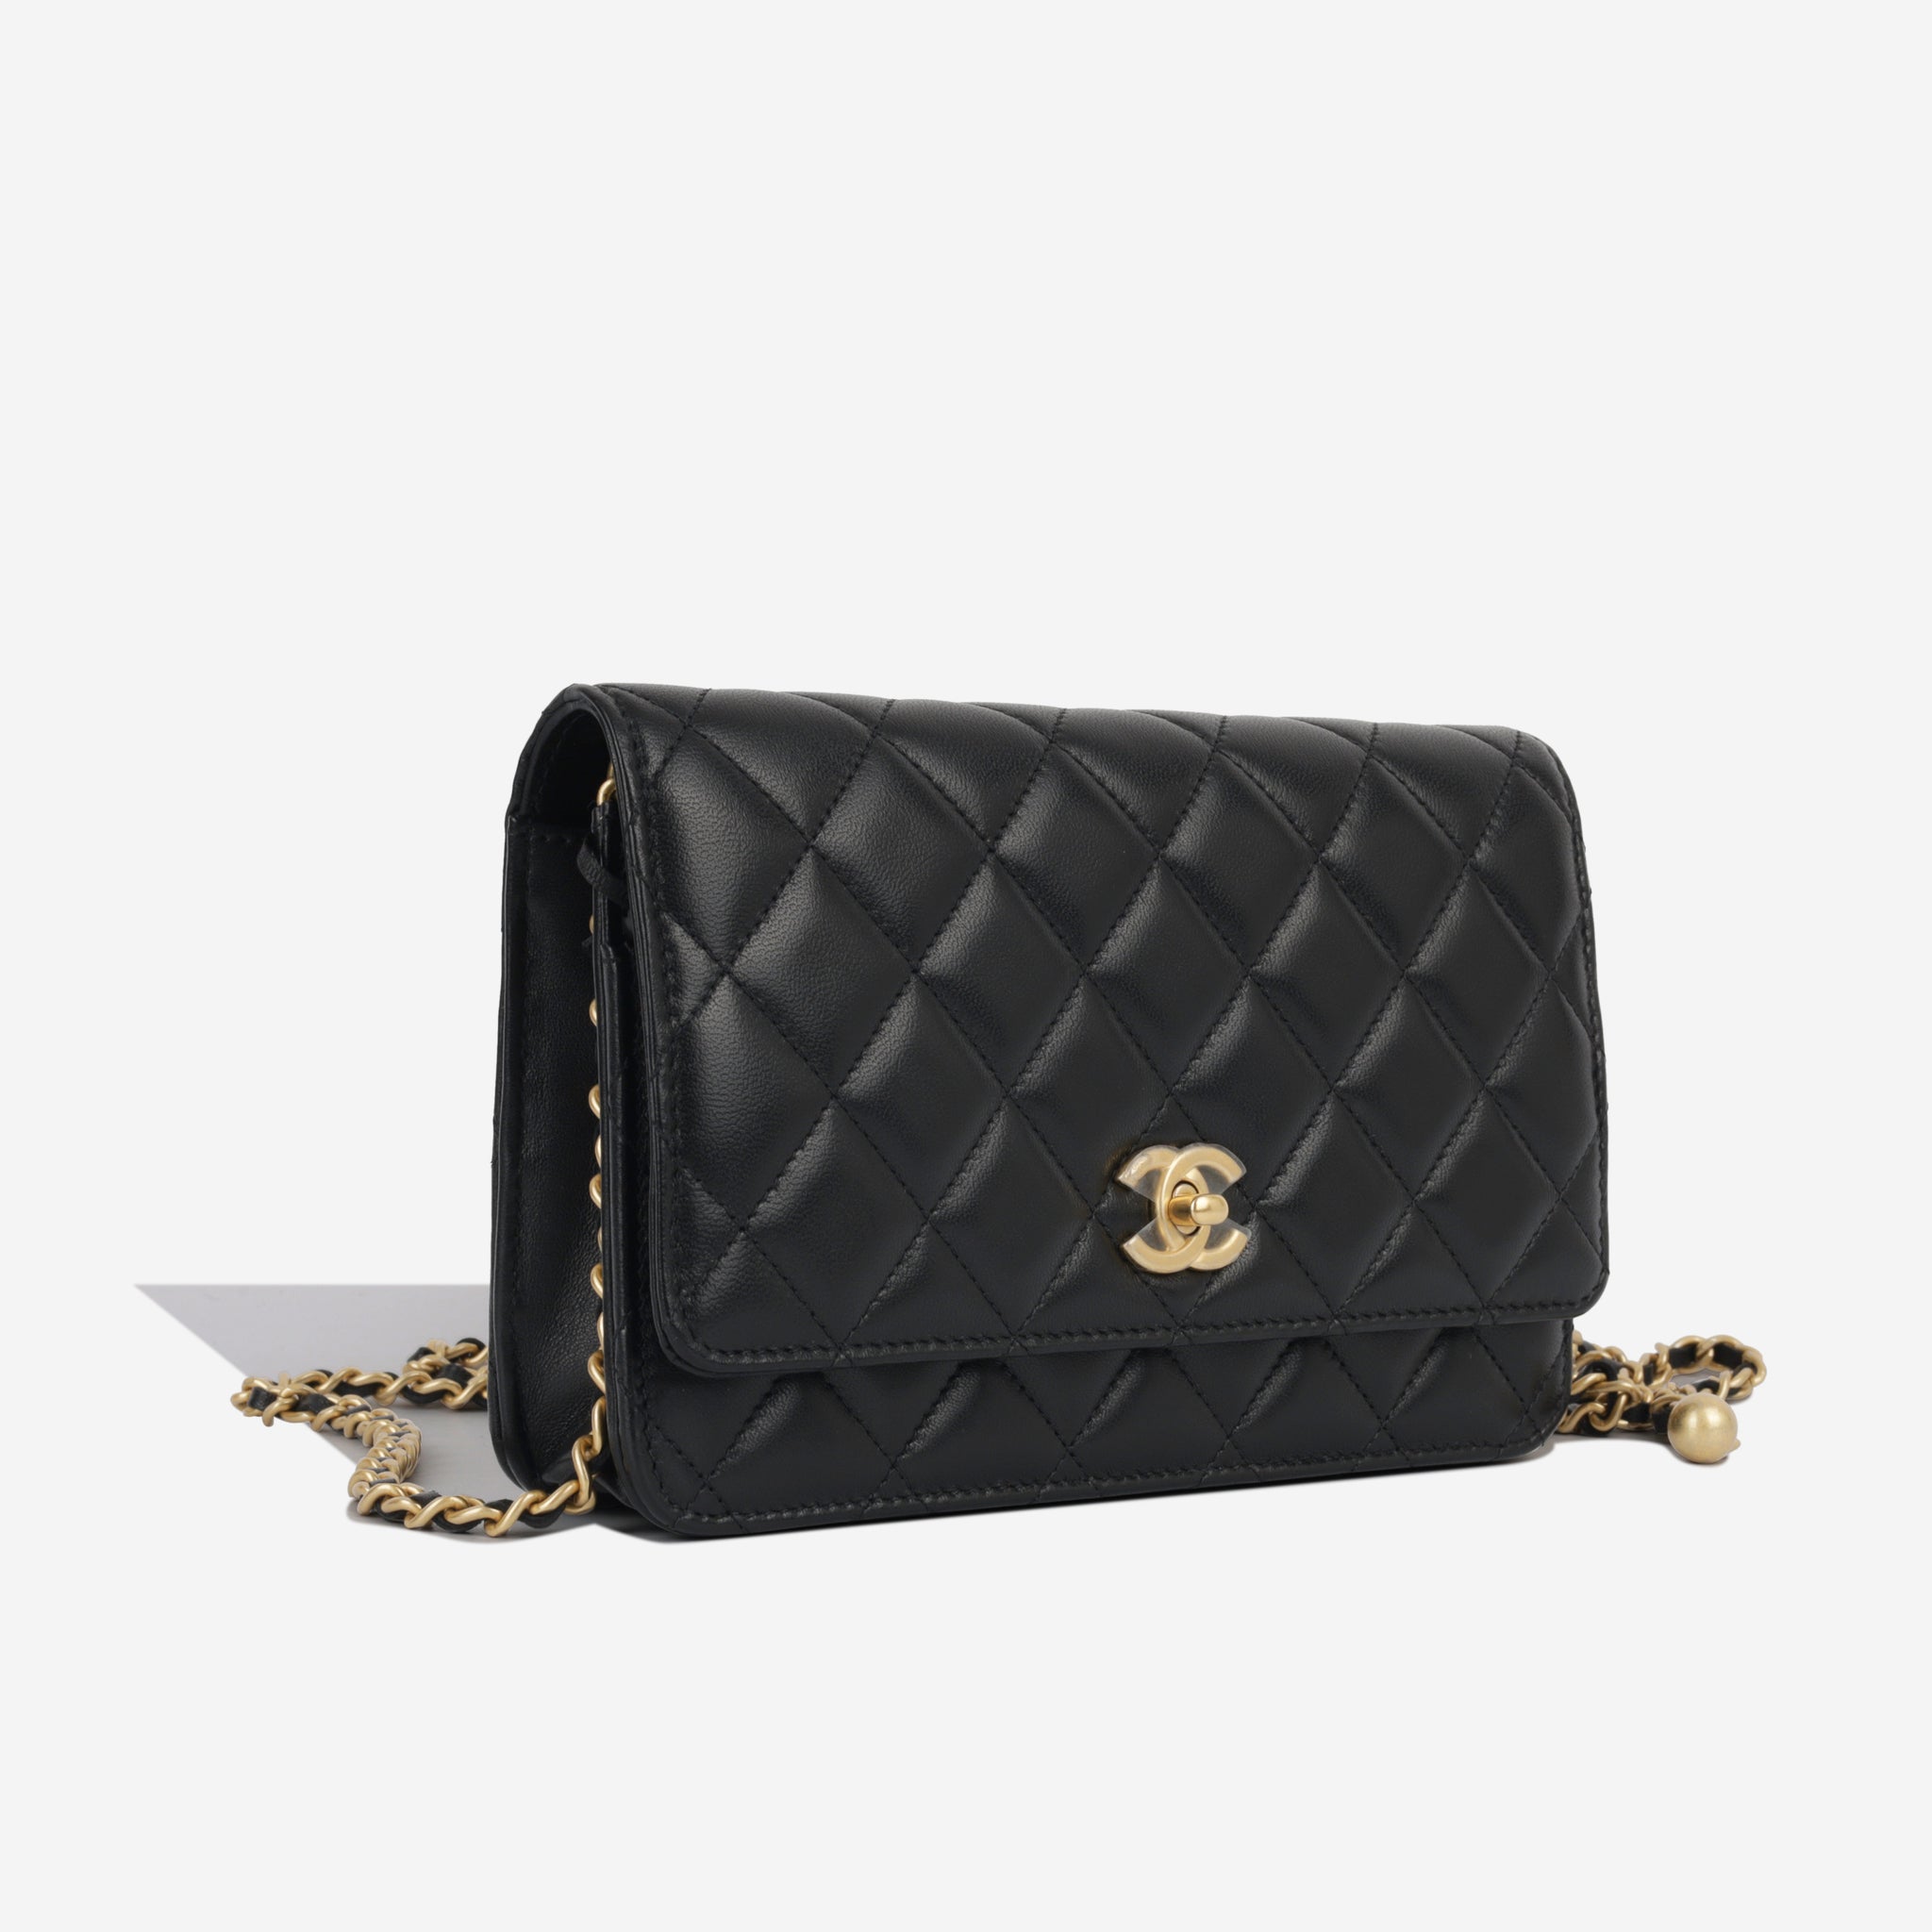 Chanel - Pearl Crush Wallet On Chain - Black Lambskin - CGHW - Brand New